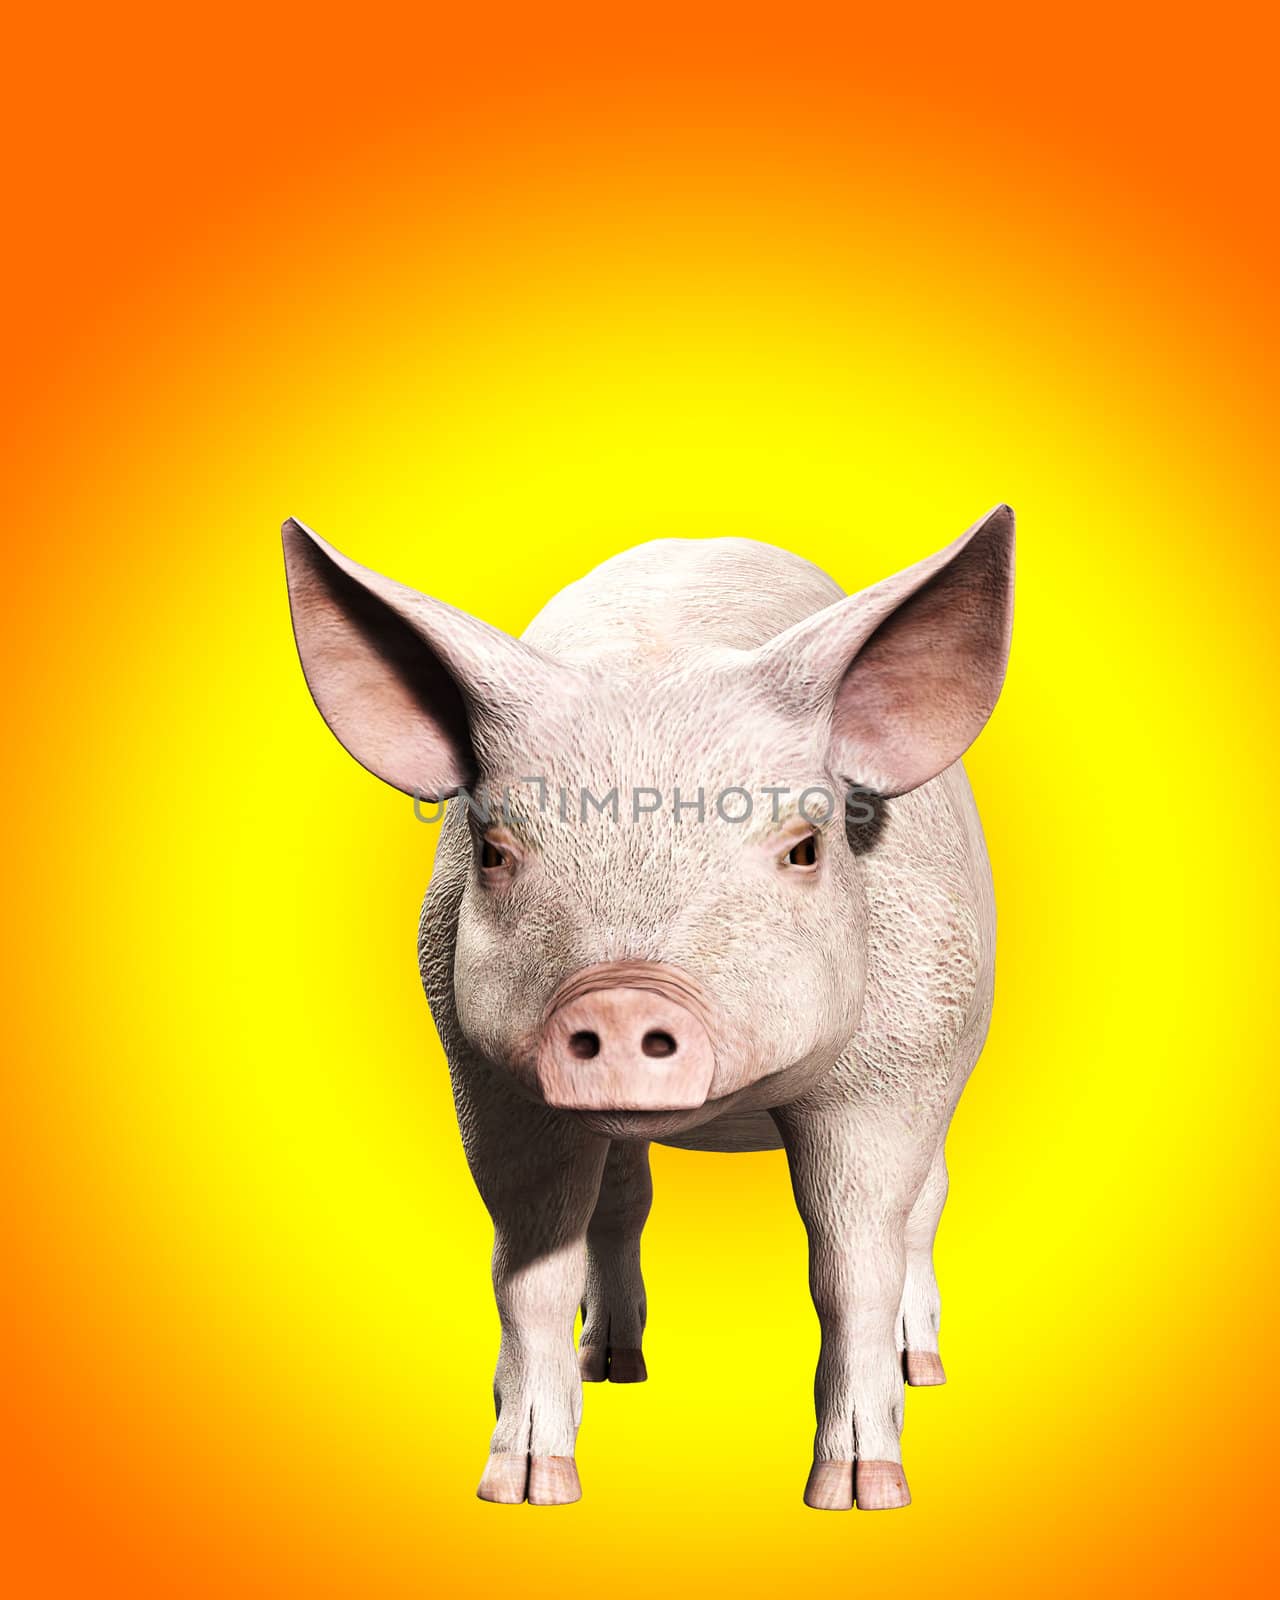 A simple image of a pink farm pig.